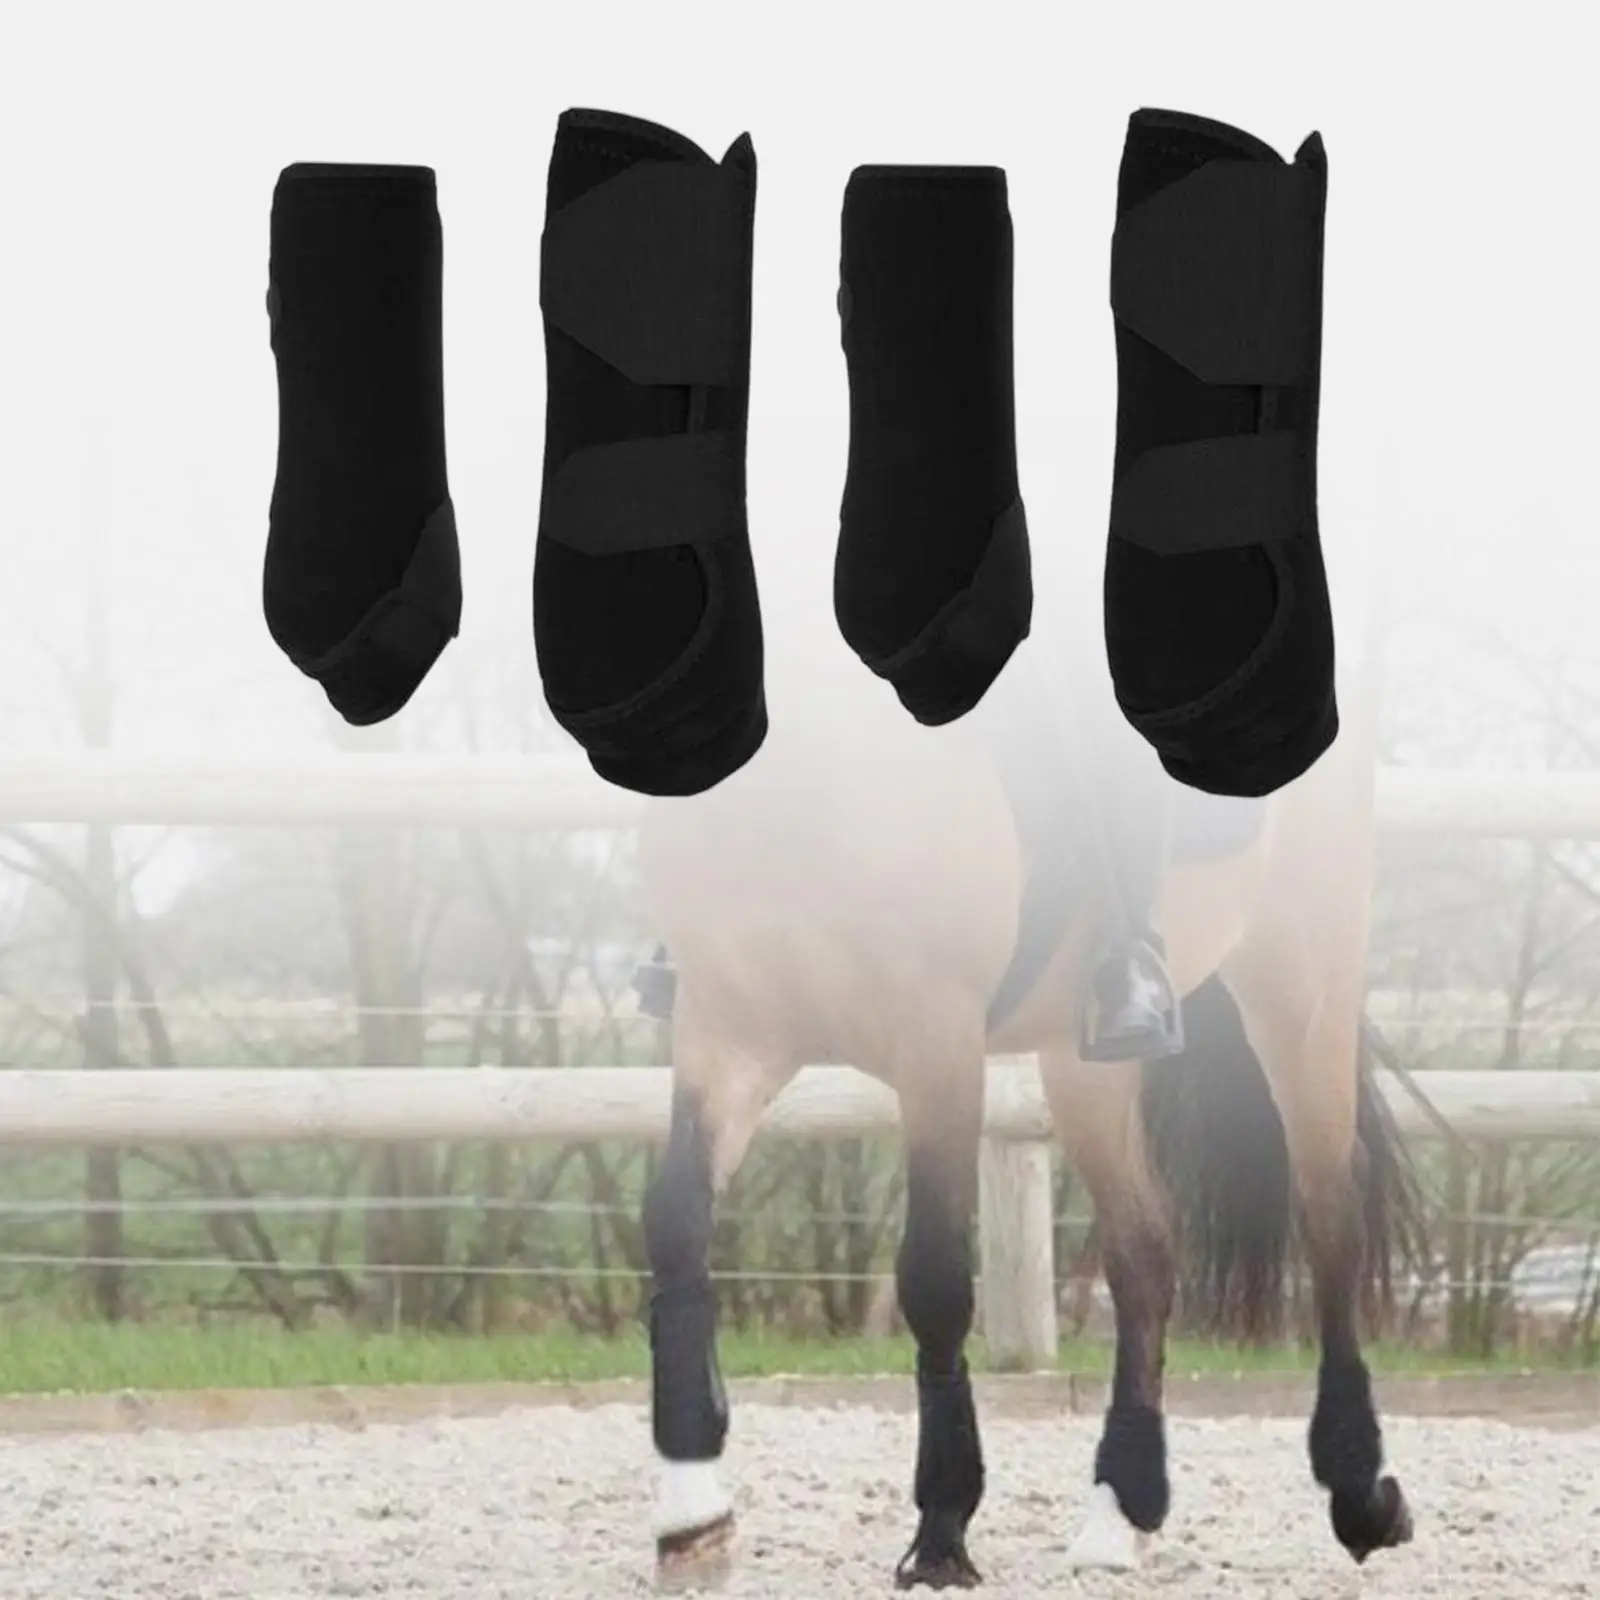 4x Neoprene Horse Boots Leg Protection Wraps Shockproof Protector Gear for Jumping Training Riding Equestrian Equipment